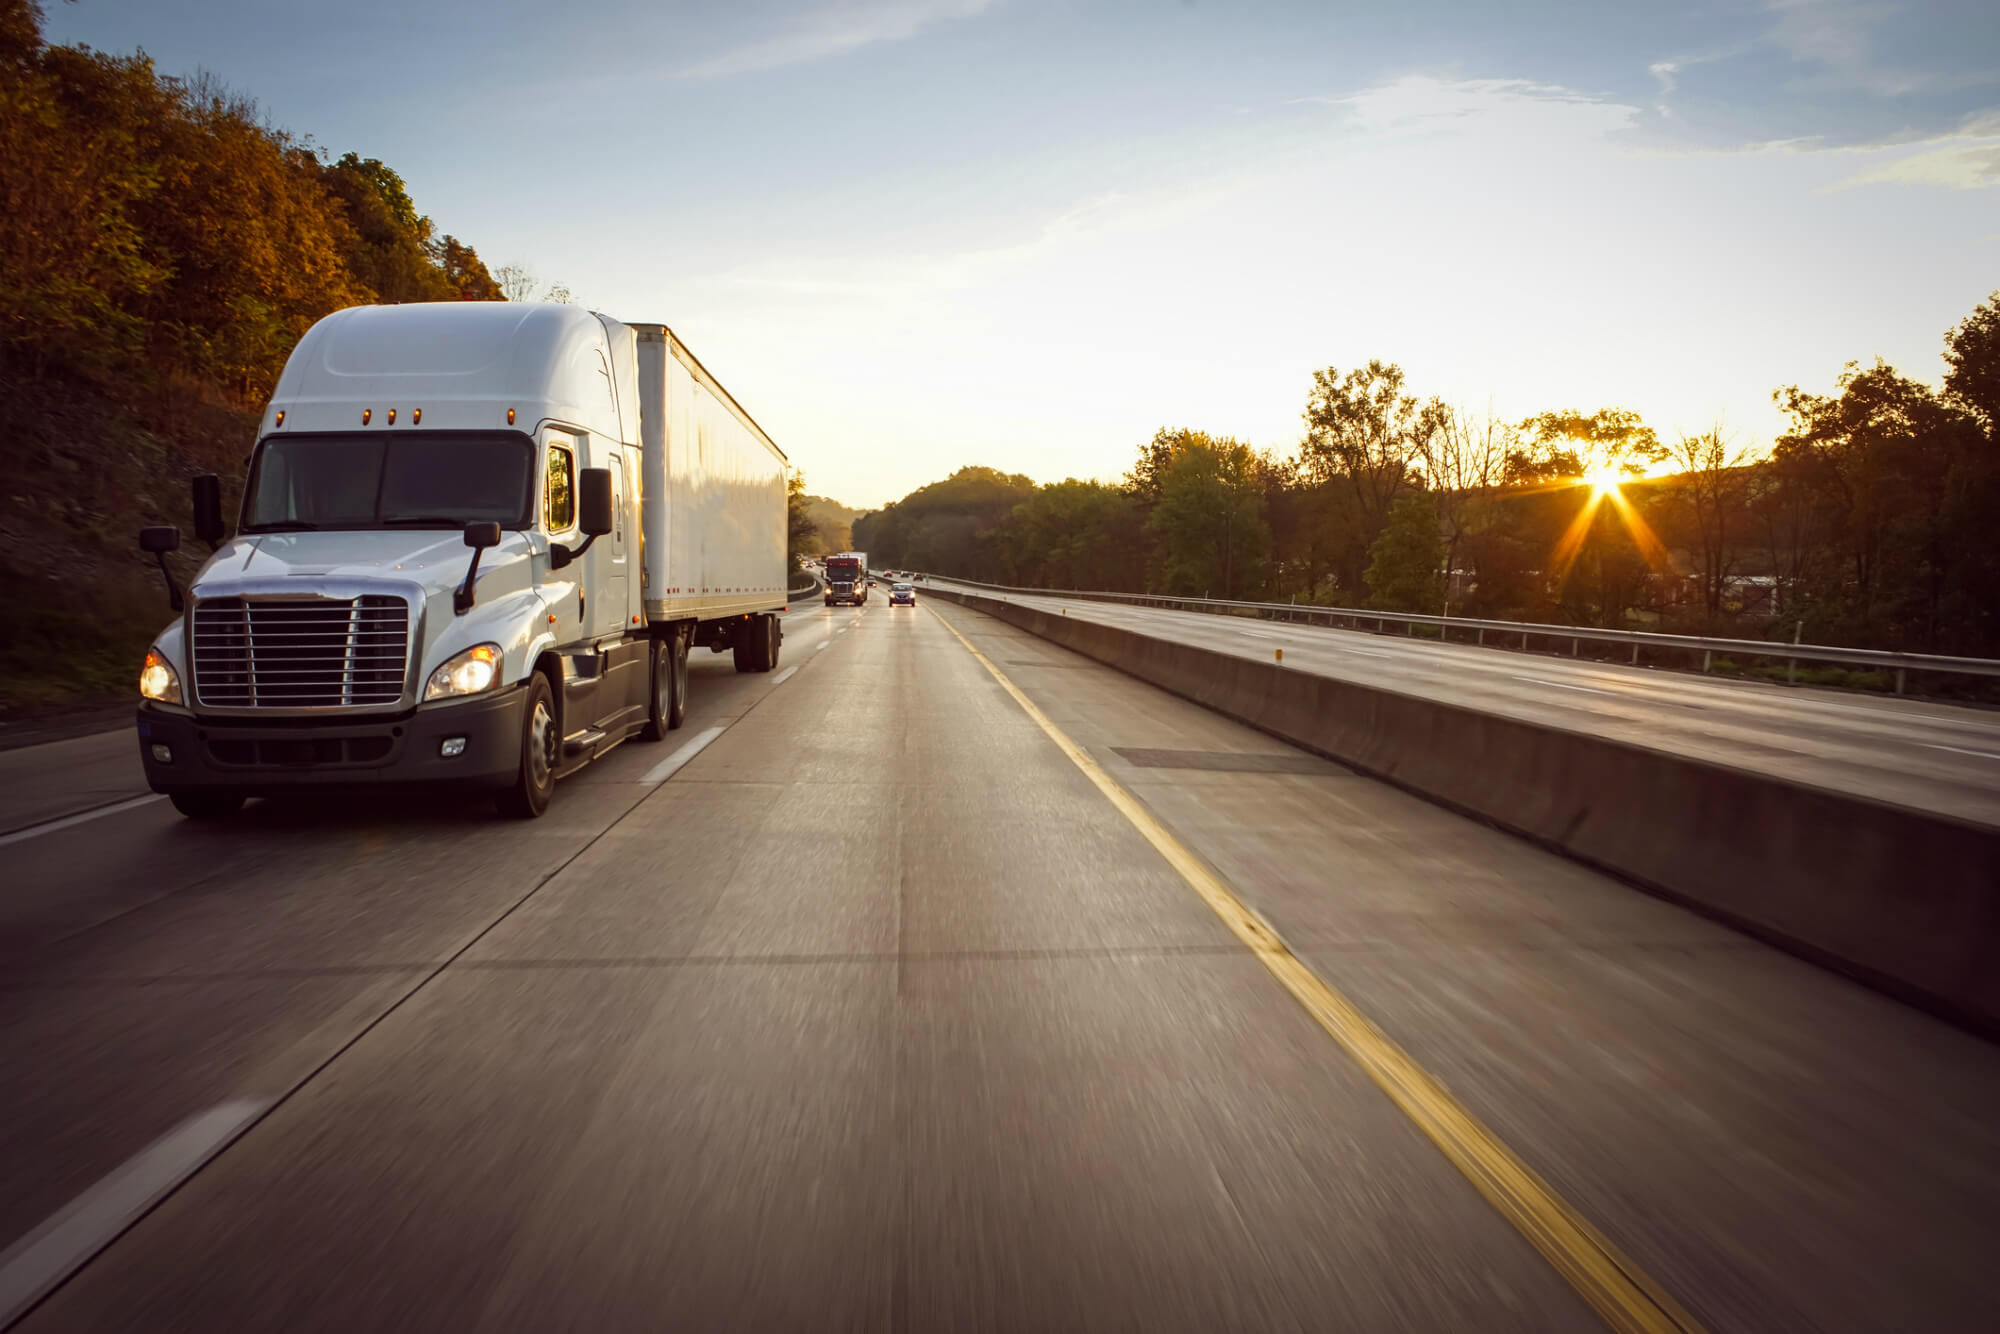 Truck Driver Tips To Avoid Back Pain While Sitting - The Healthy Trucker 